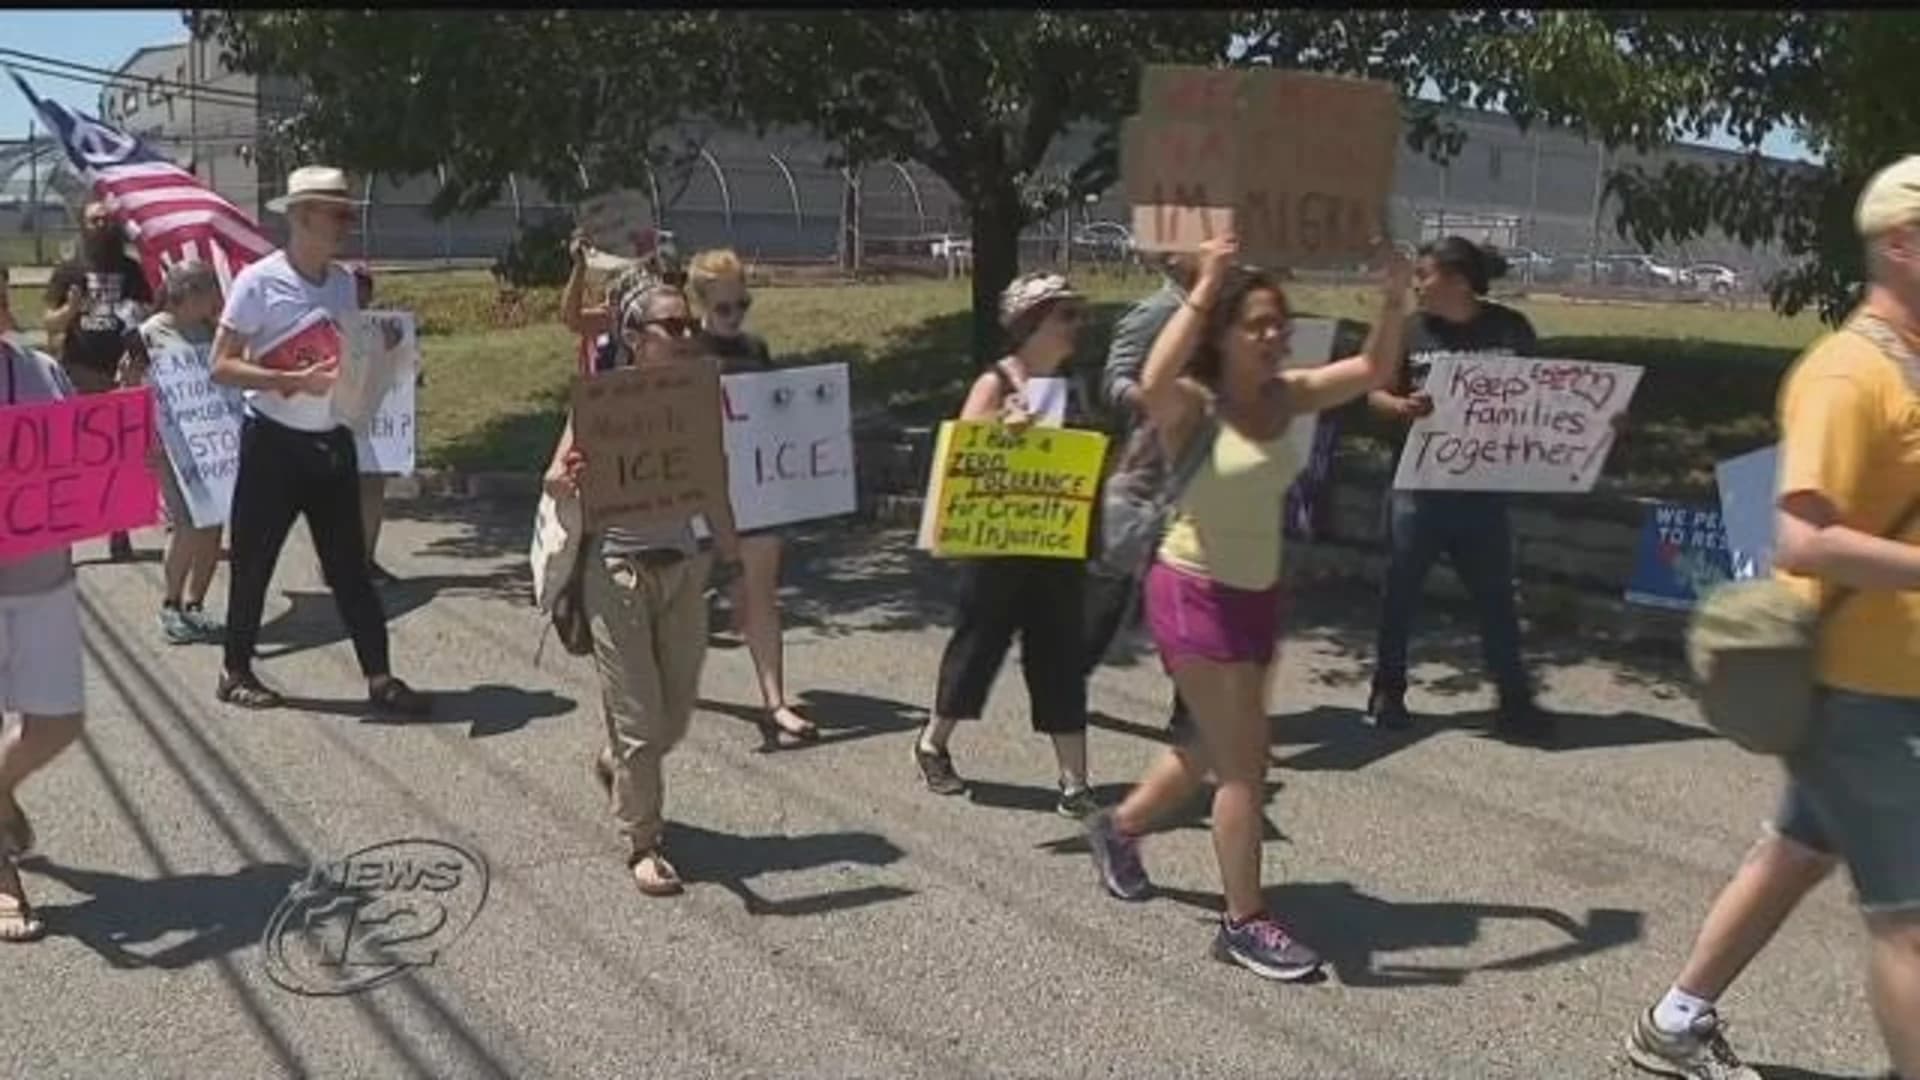 Rally held at Essex County Jail to protest ICE, immigration policies